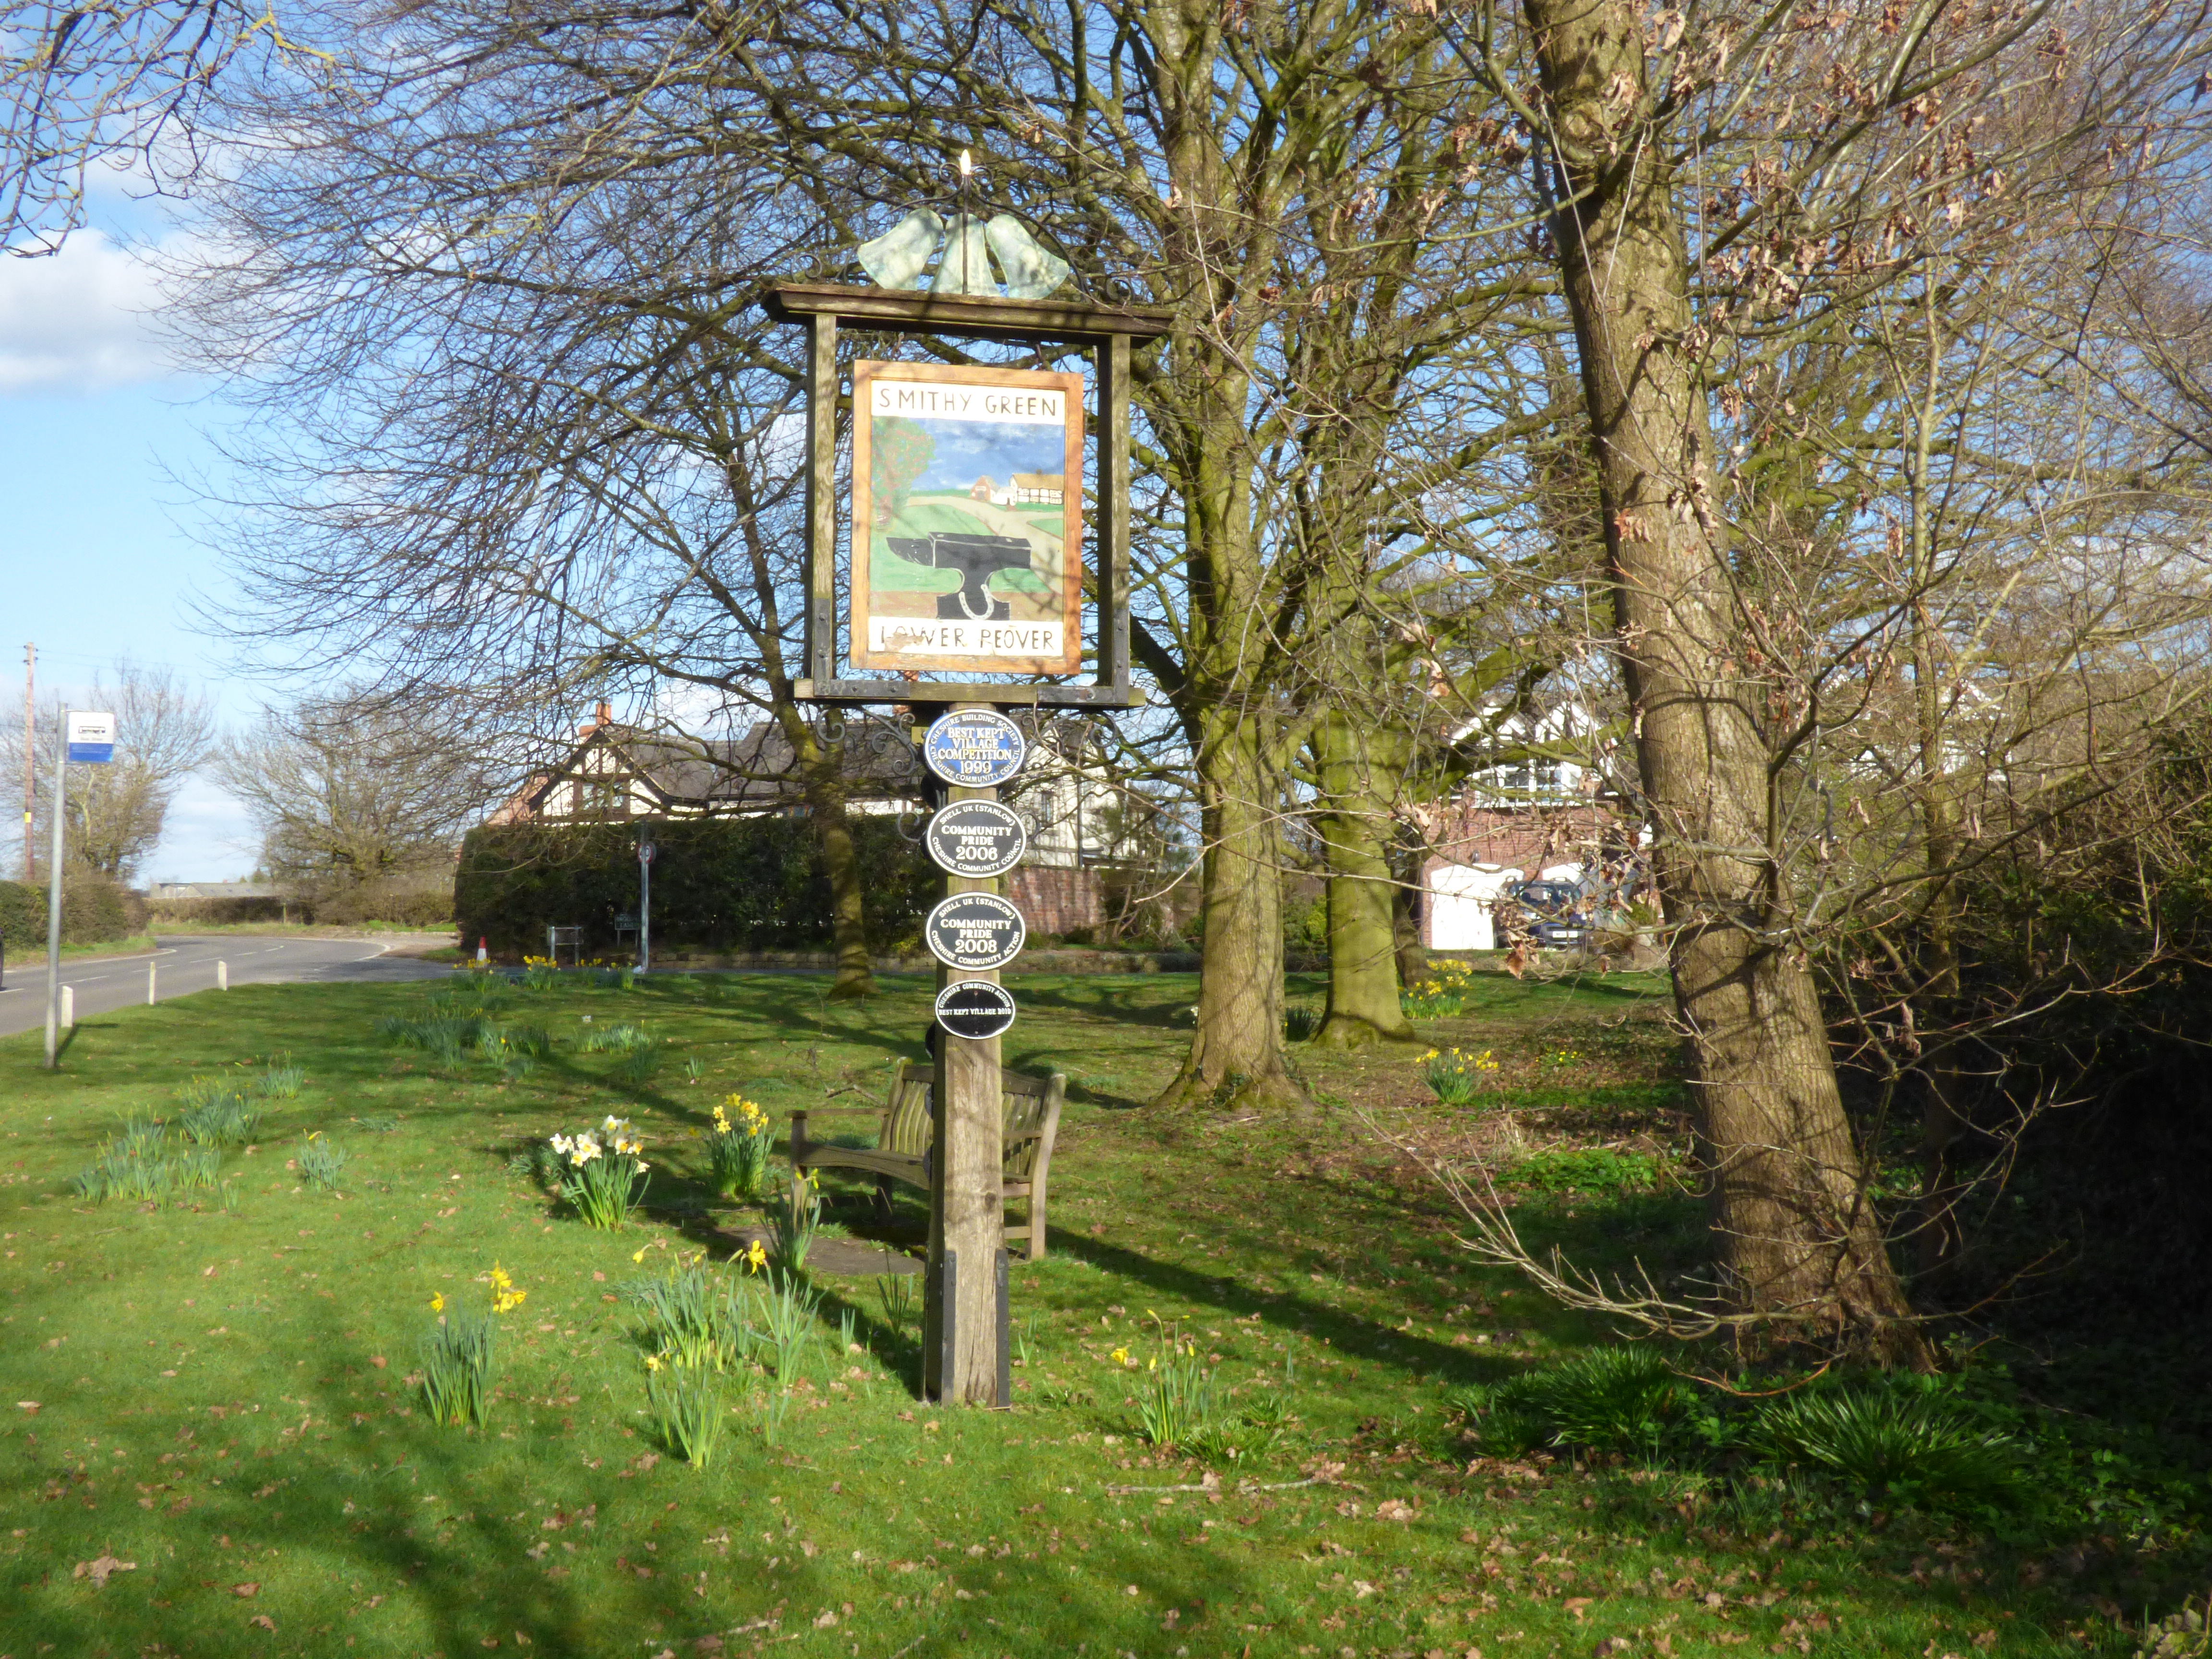 Smithy Green sign